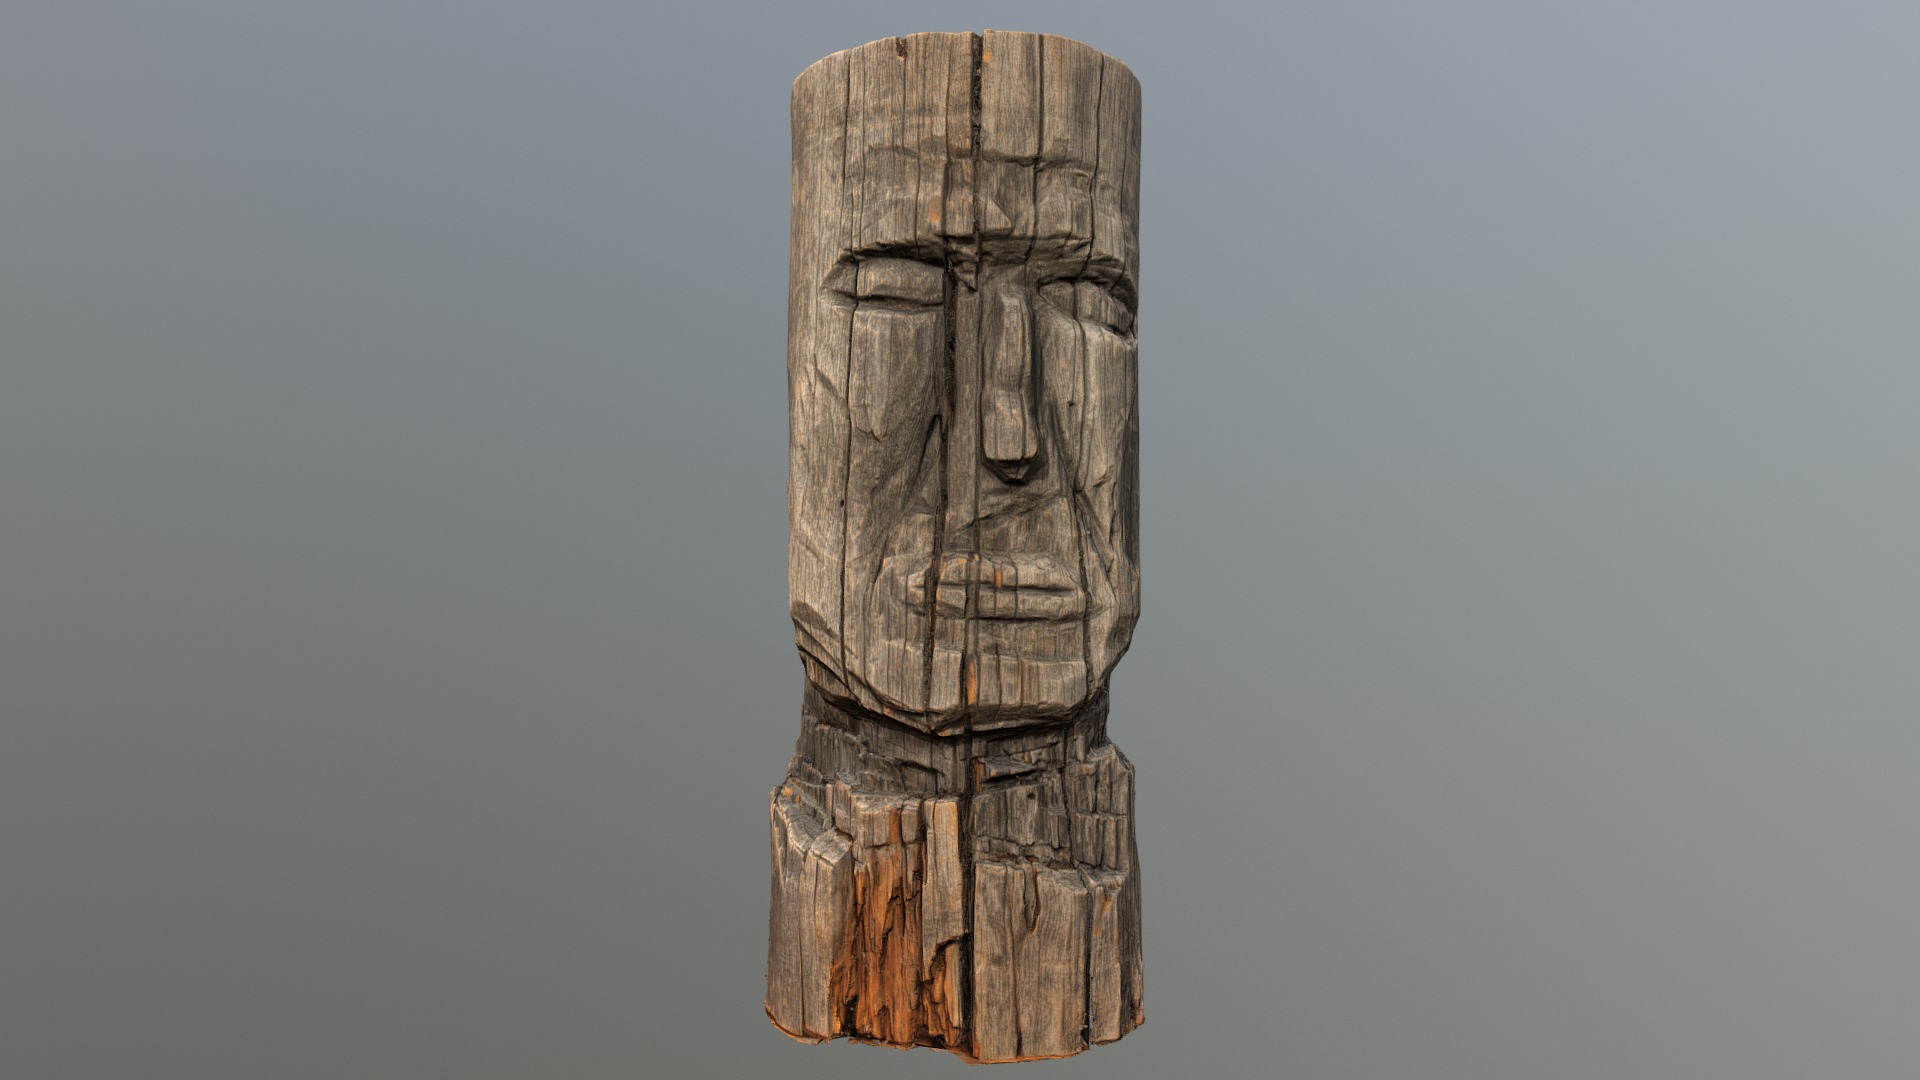 3D model Stump - This is a 3D model of the Stump. The 3D model is about a wood carving of a person.